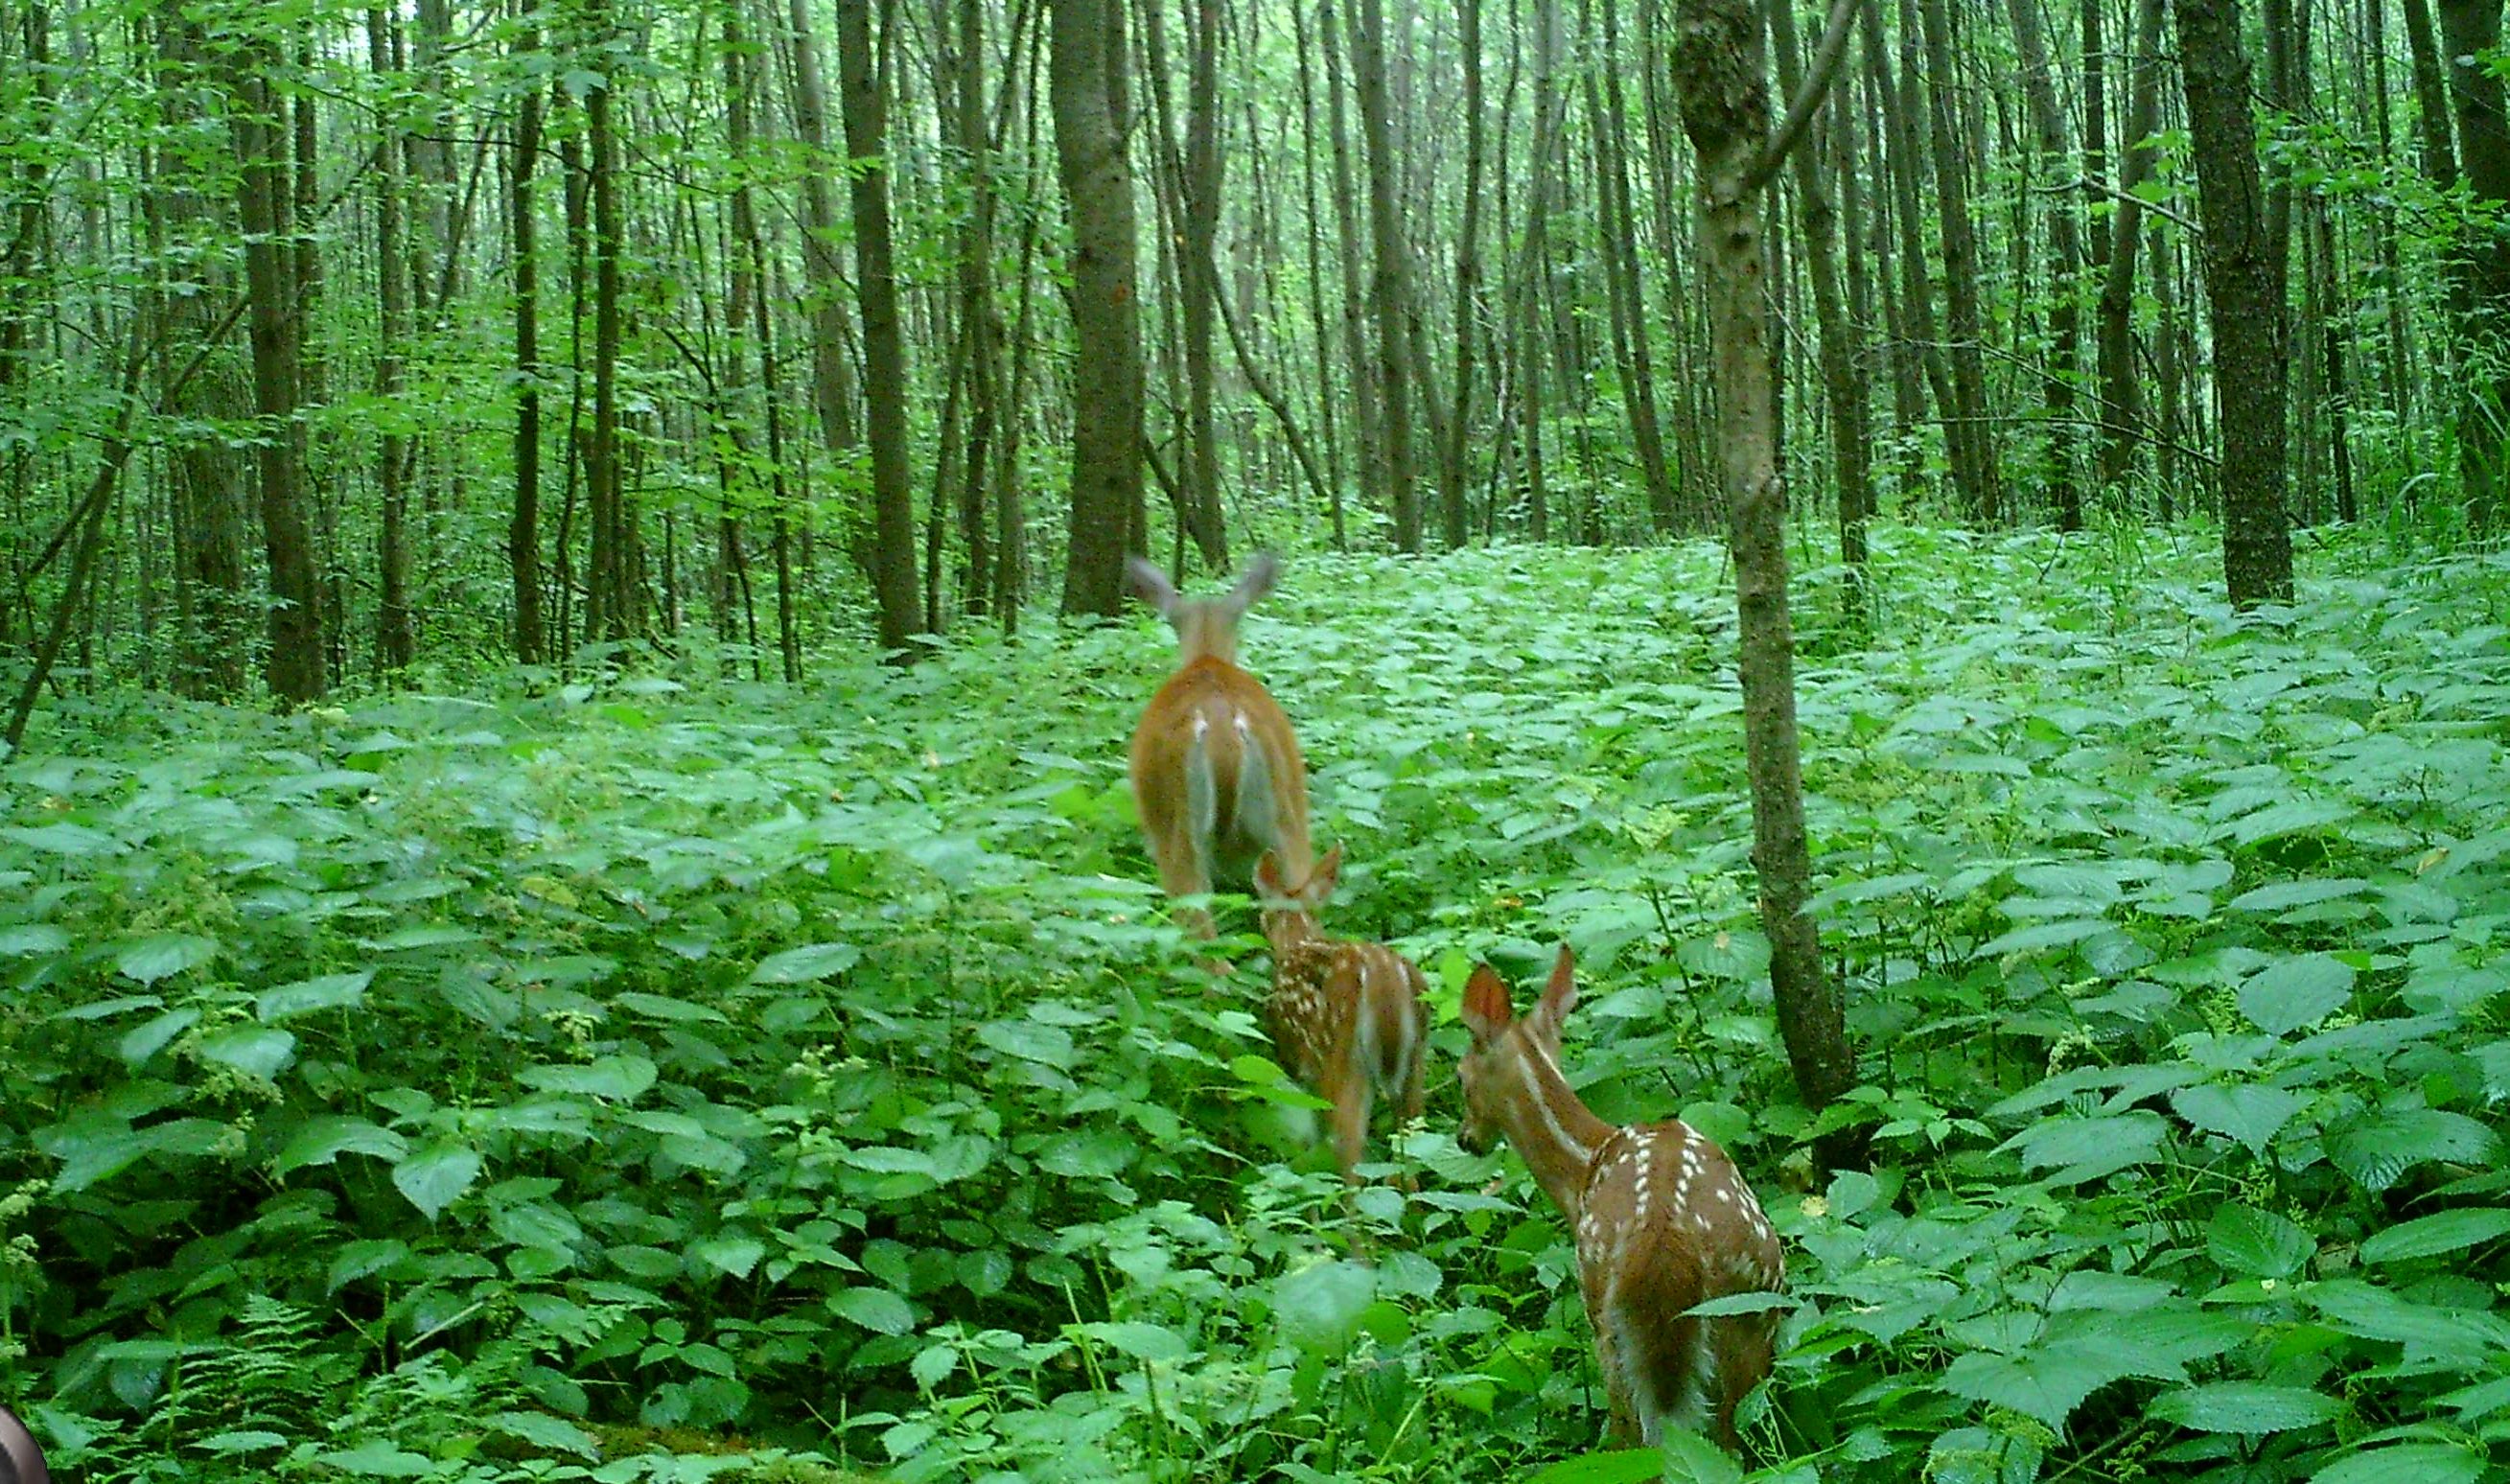 Doe walking away from camera with 2 fawns following behind her in the forest